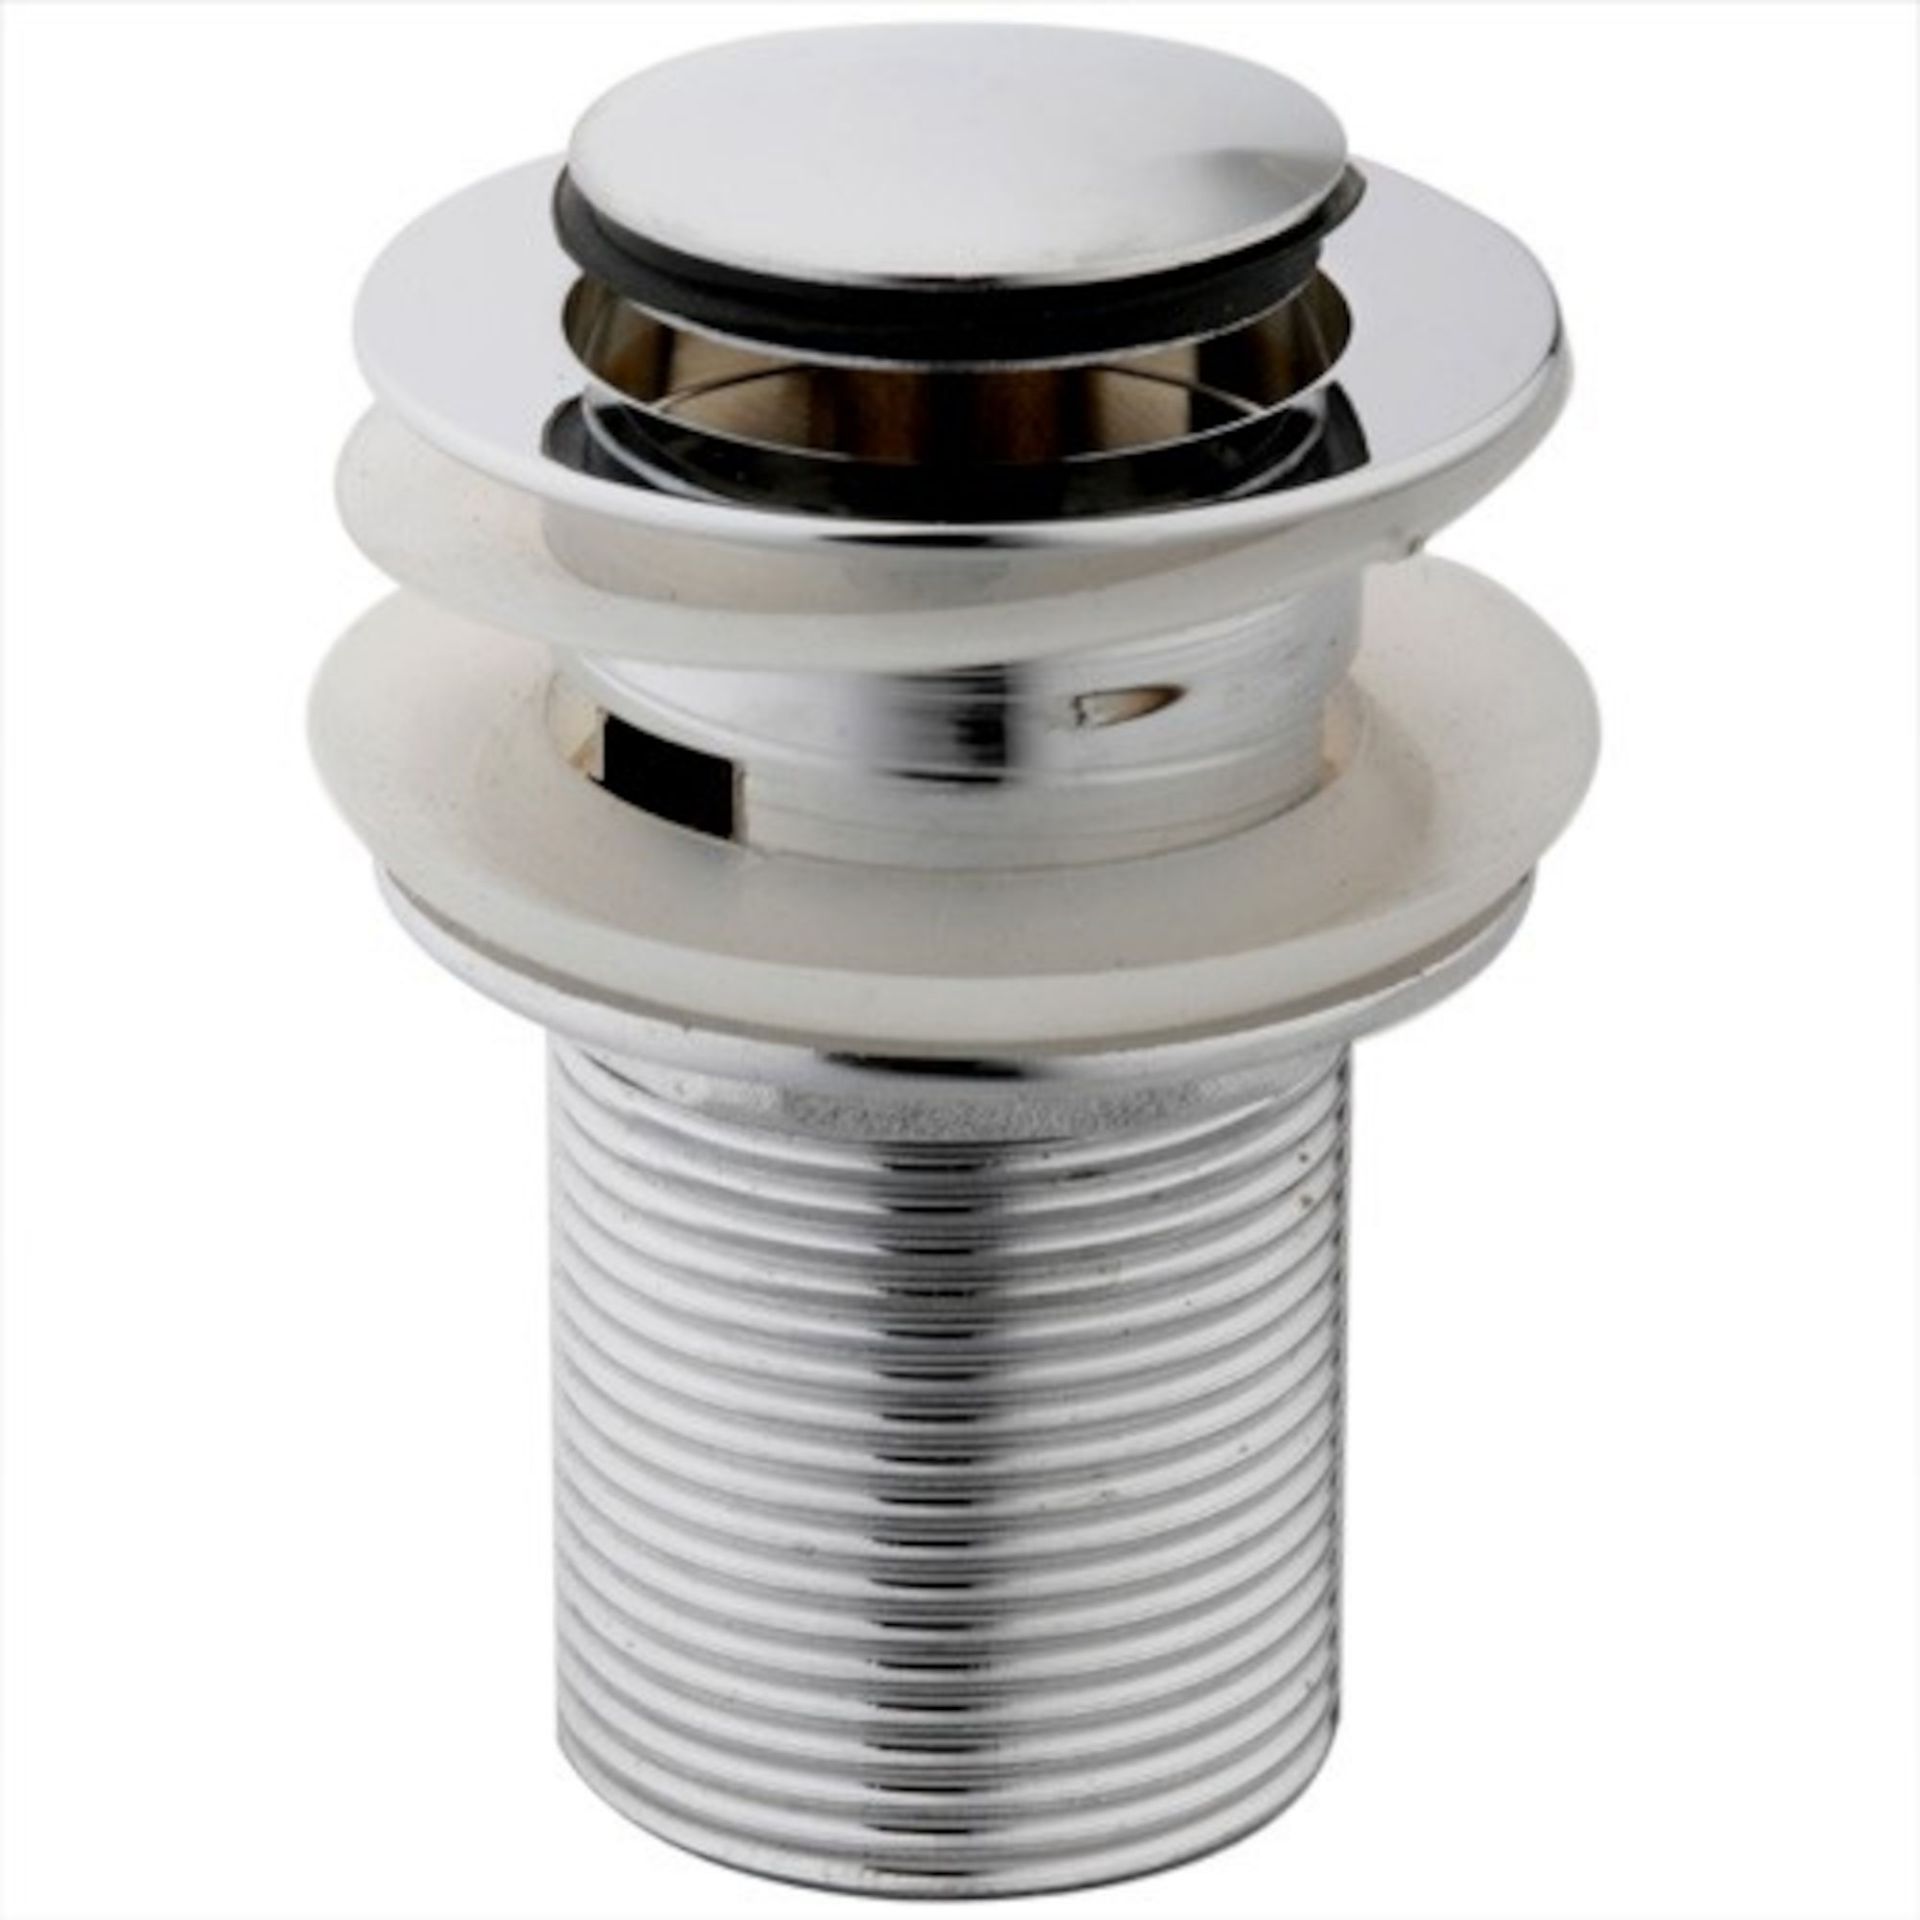 (E1002) Basin Waste - Slotted Push Button Pop-Up Made with zinc with solid brass components S... - Image 2 of 2